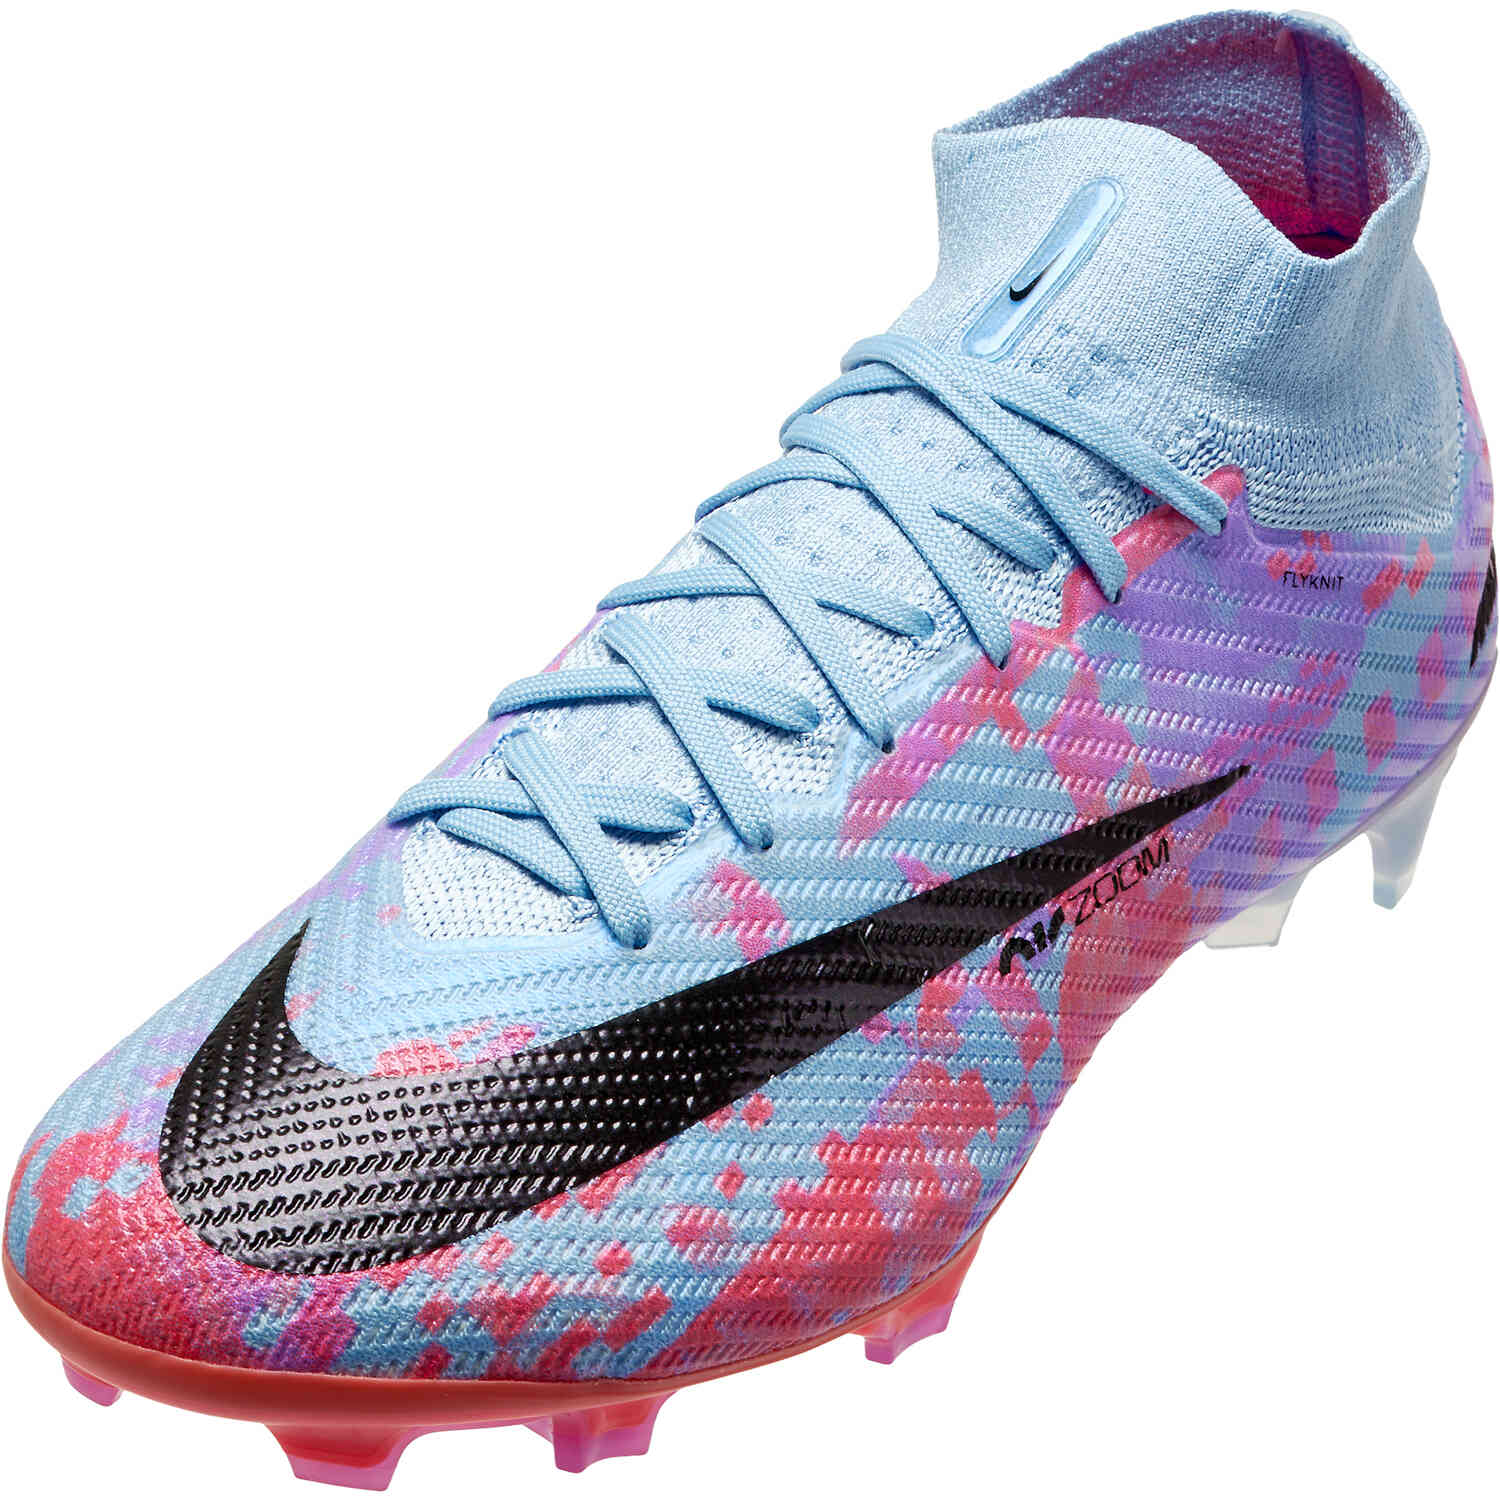 Nike Zoom Dream Speed Mercurial Superfly 9 Elite FG – Geode Teal & Barely Volt with Fuchsia Dream - Soccer